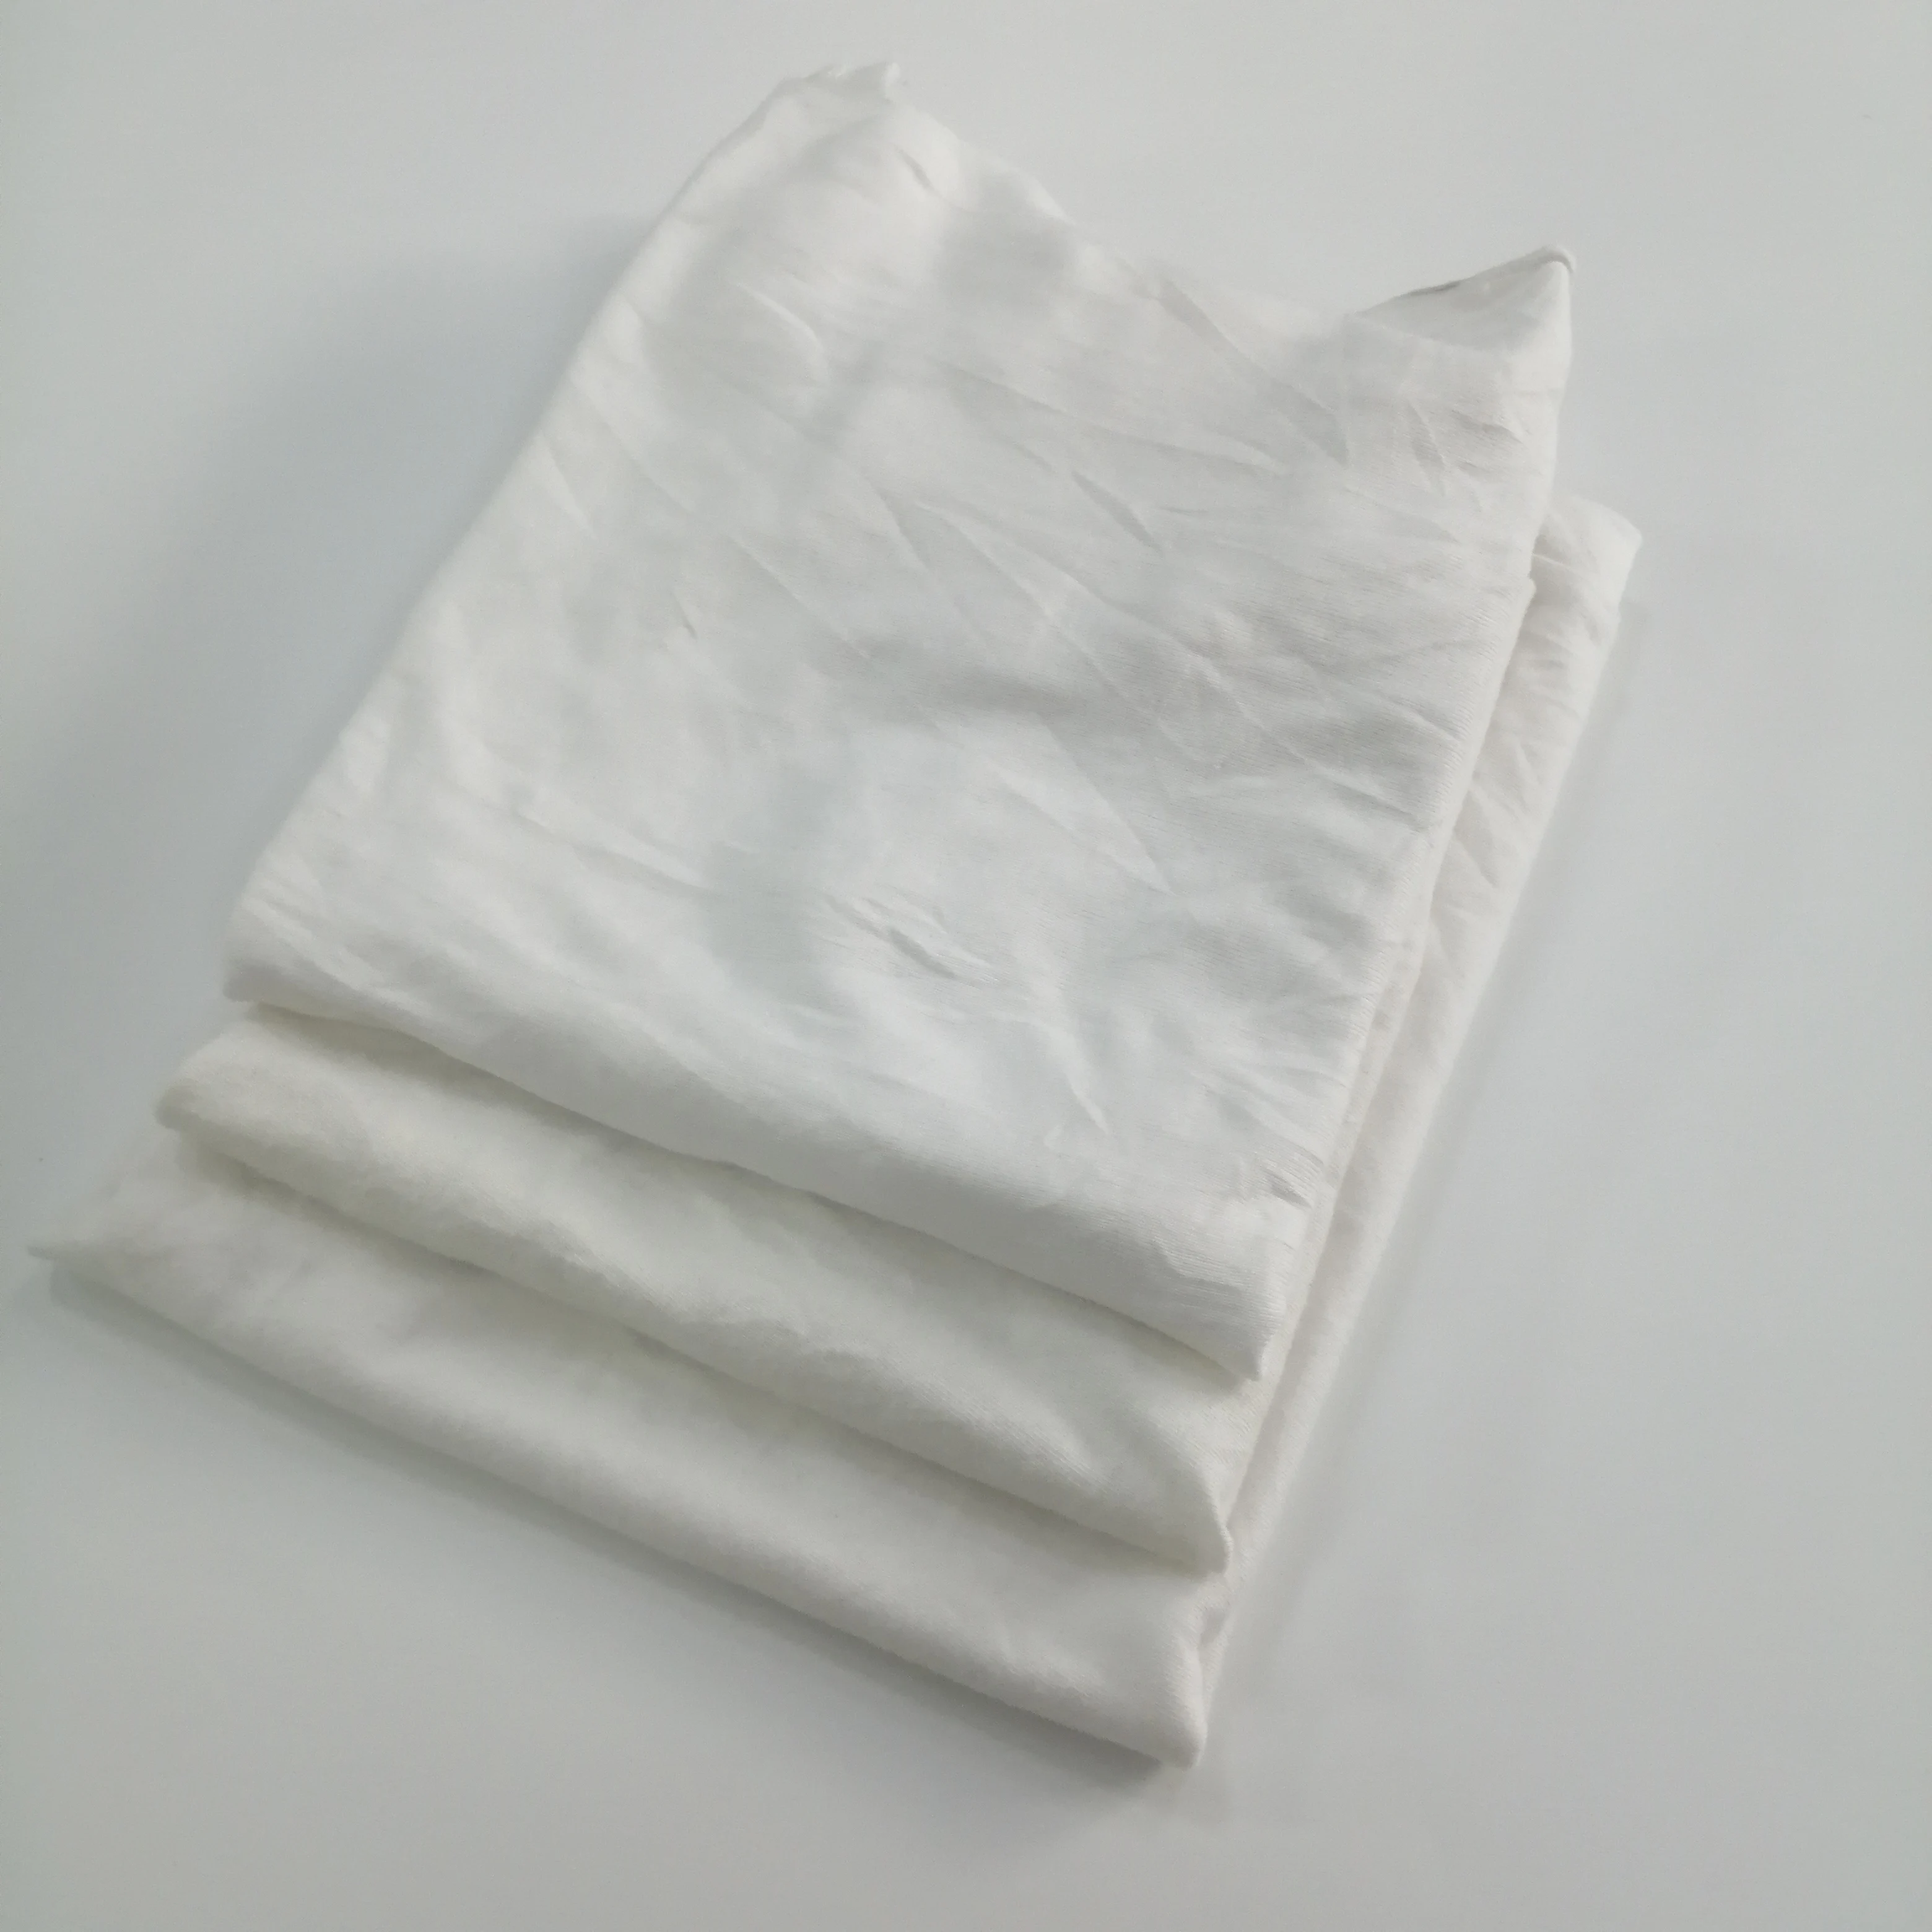 New Oil-absorbing Deoiling Fabric White Cleaning Textile Waste 100% ...